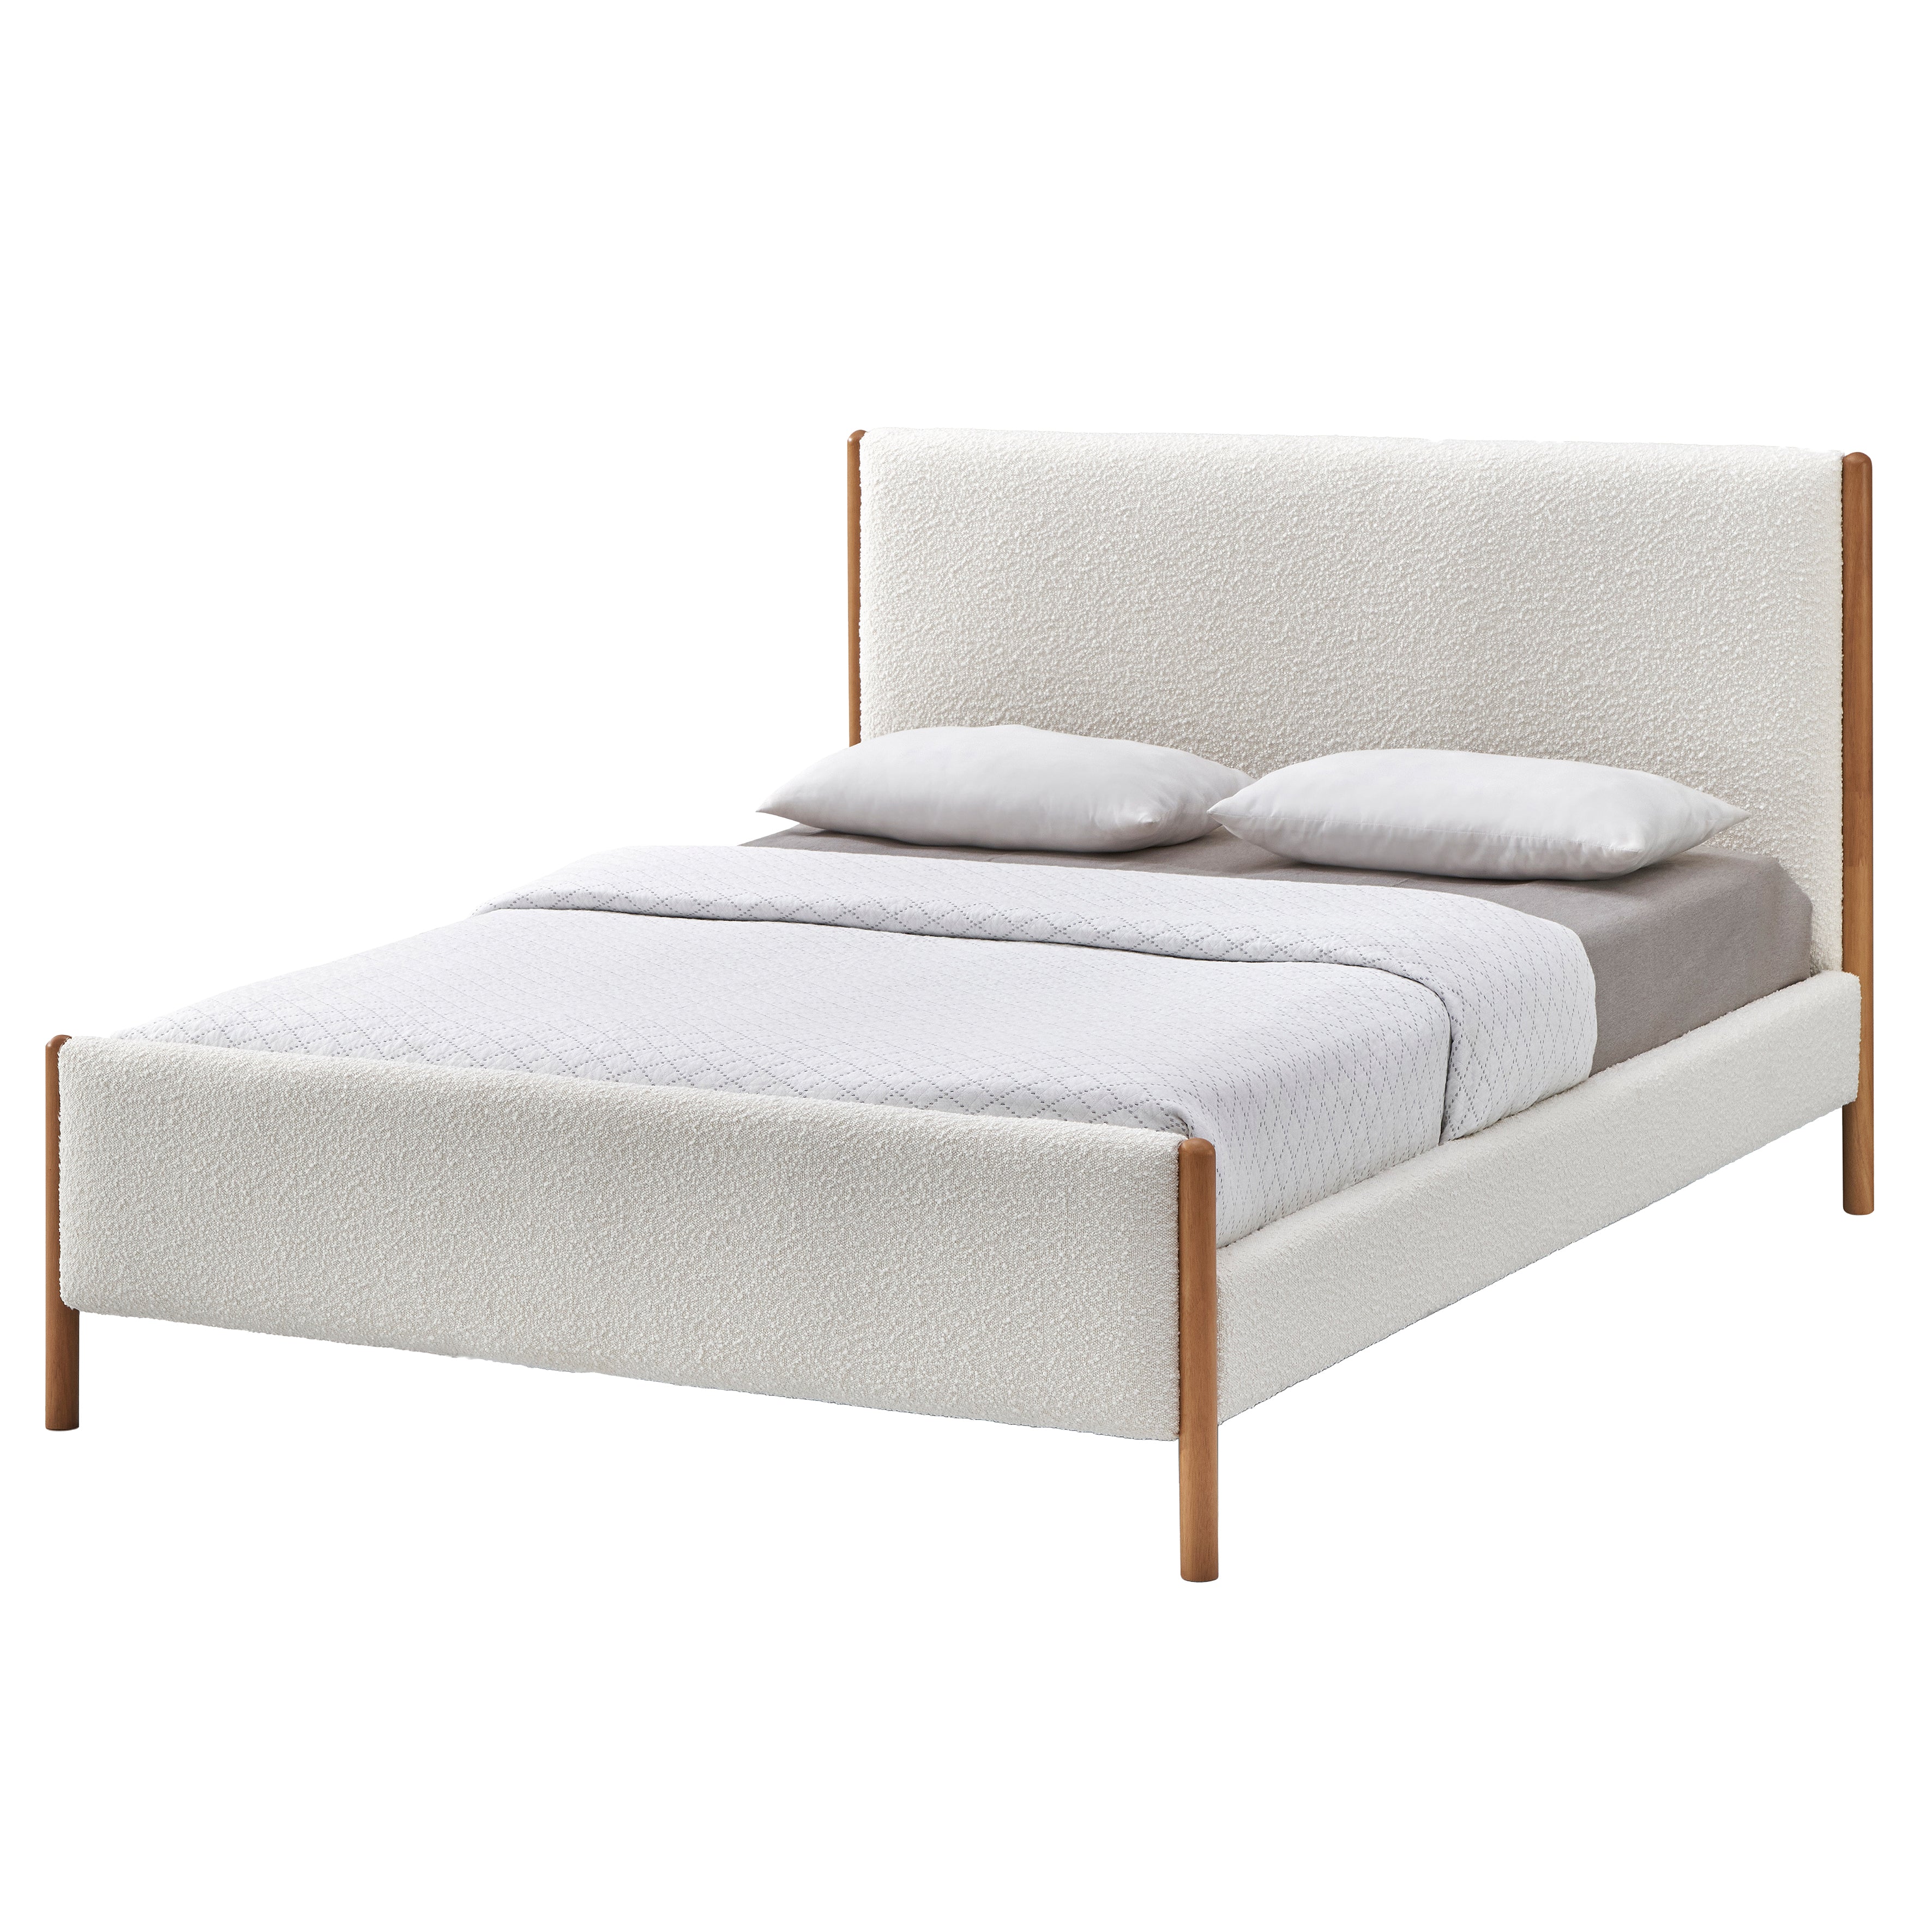 Liana Upholstered Platform Queen Bed, White Boucle Fabric